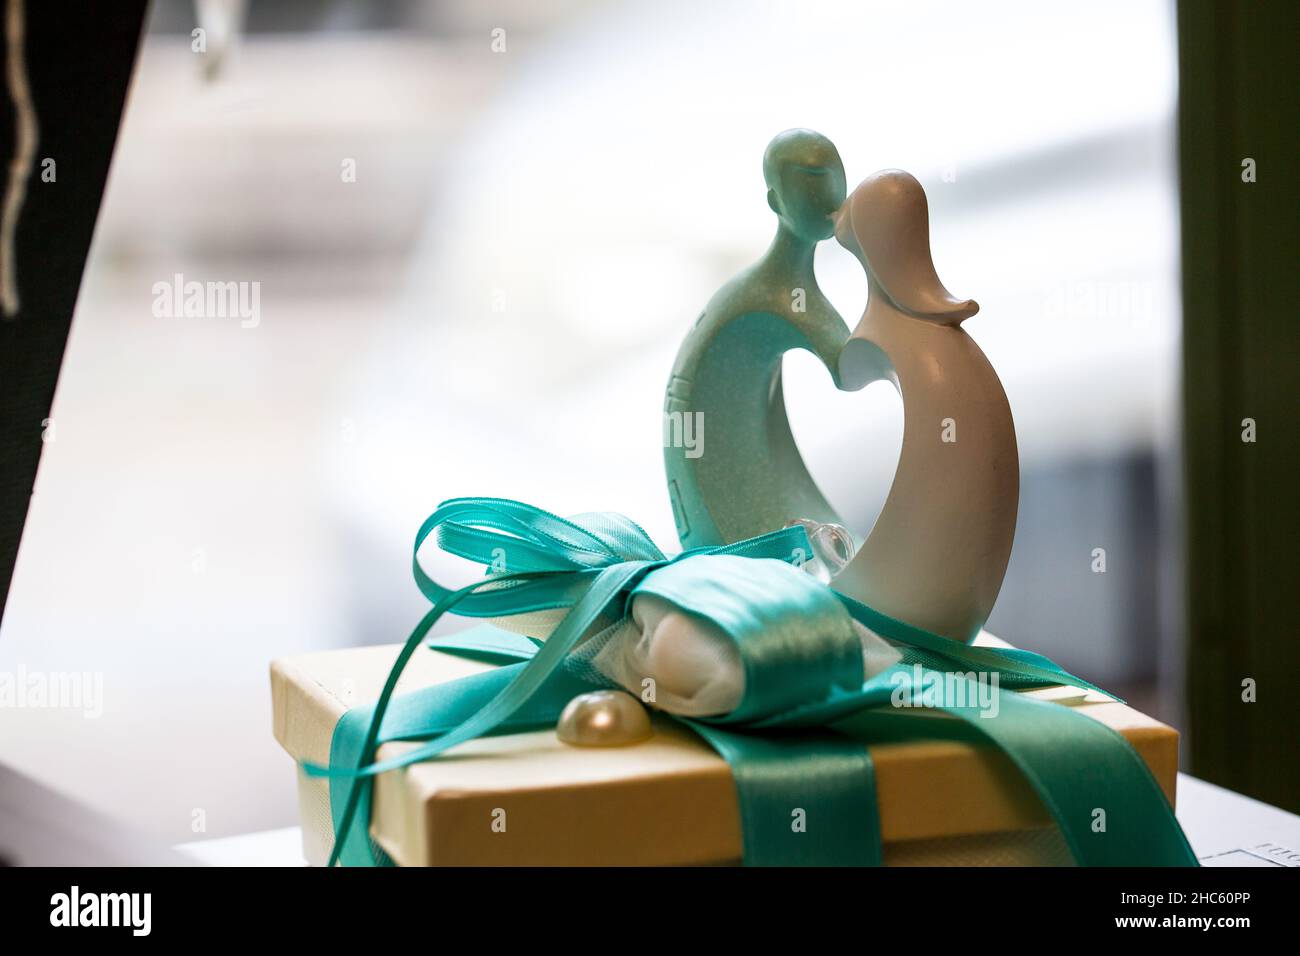 Close-up shot of a present box and figure of a couples kissing on it Stock Photo